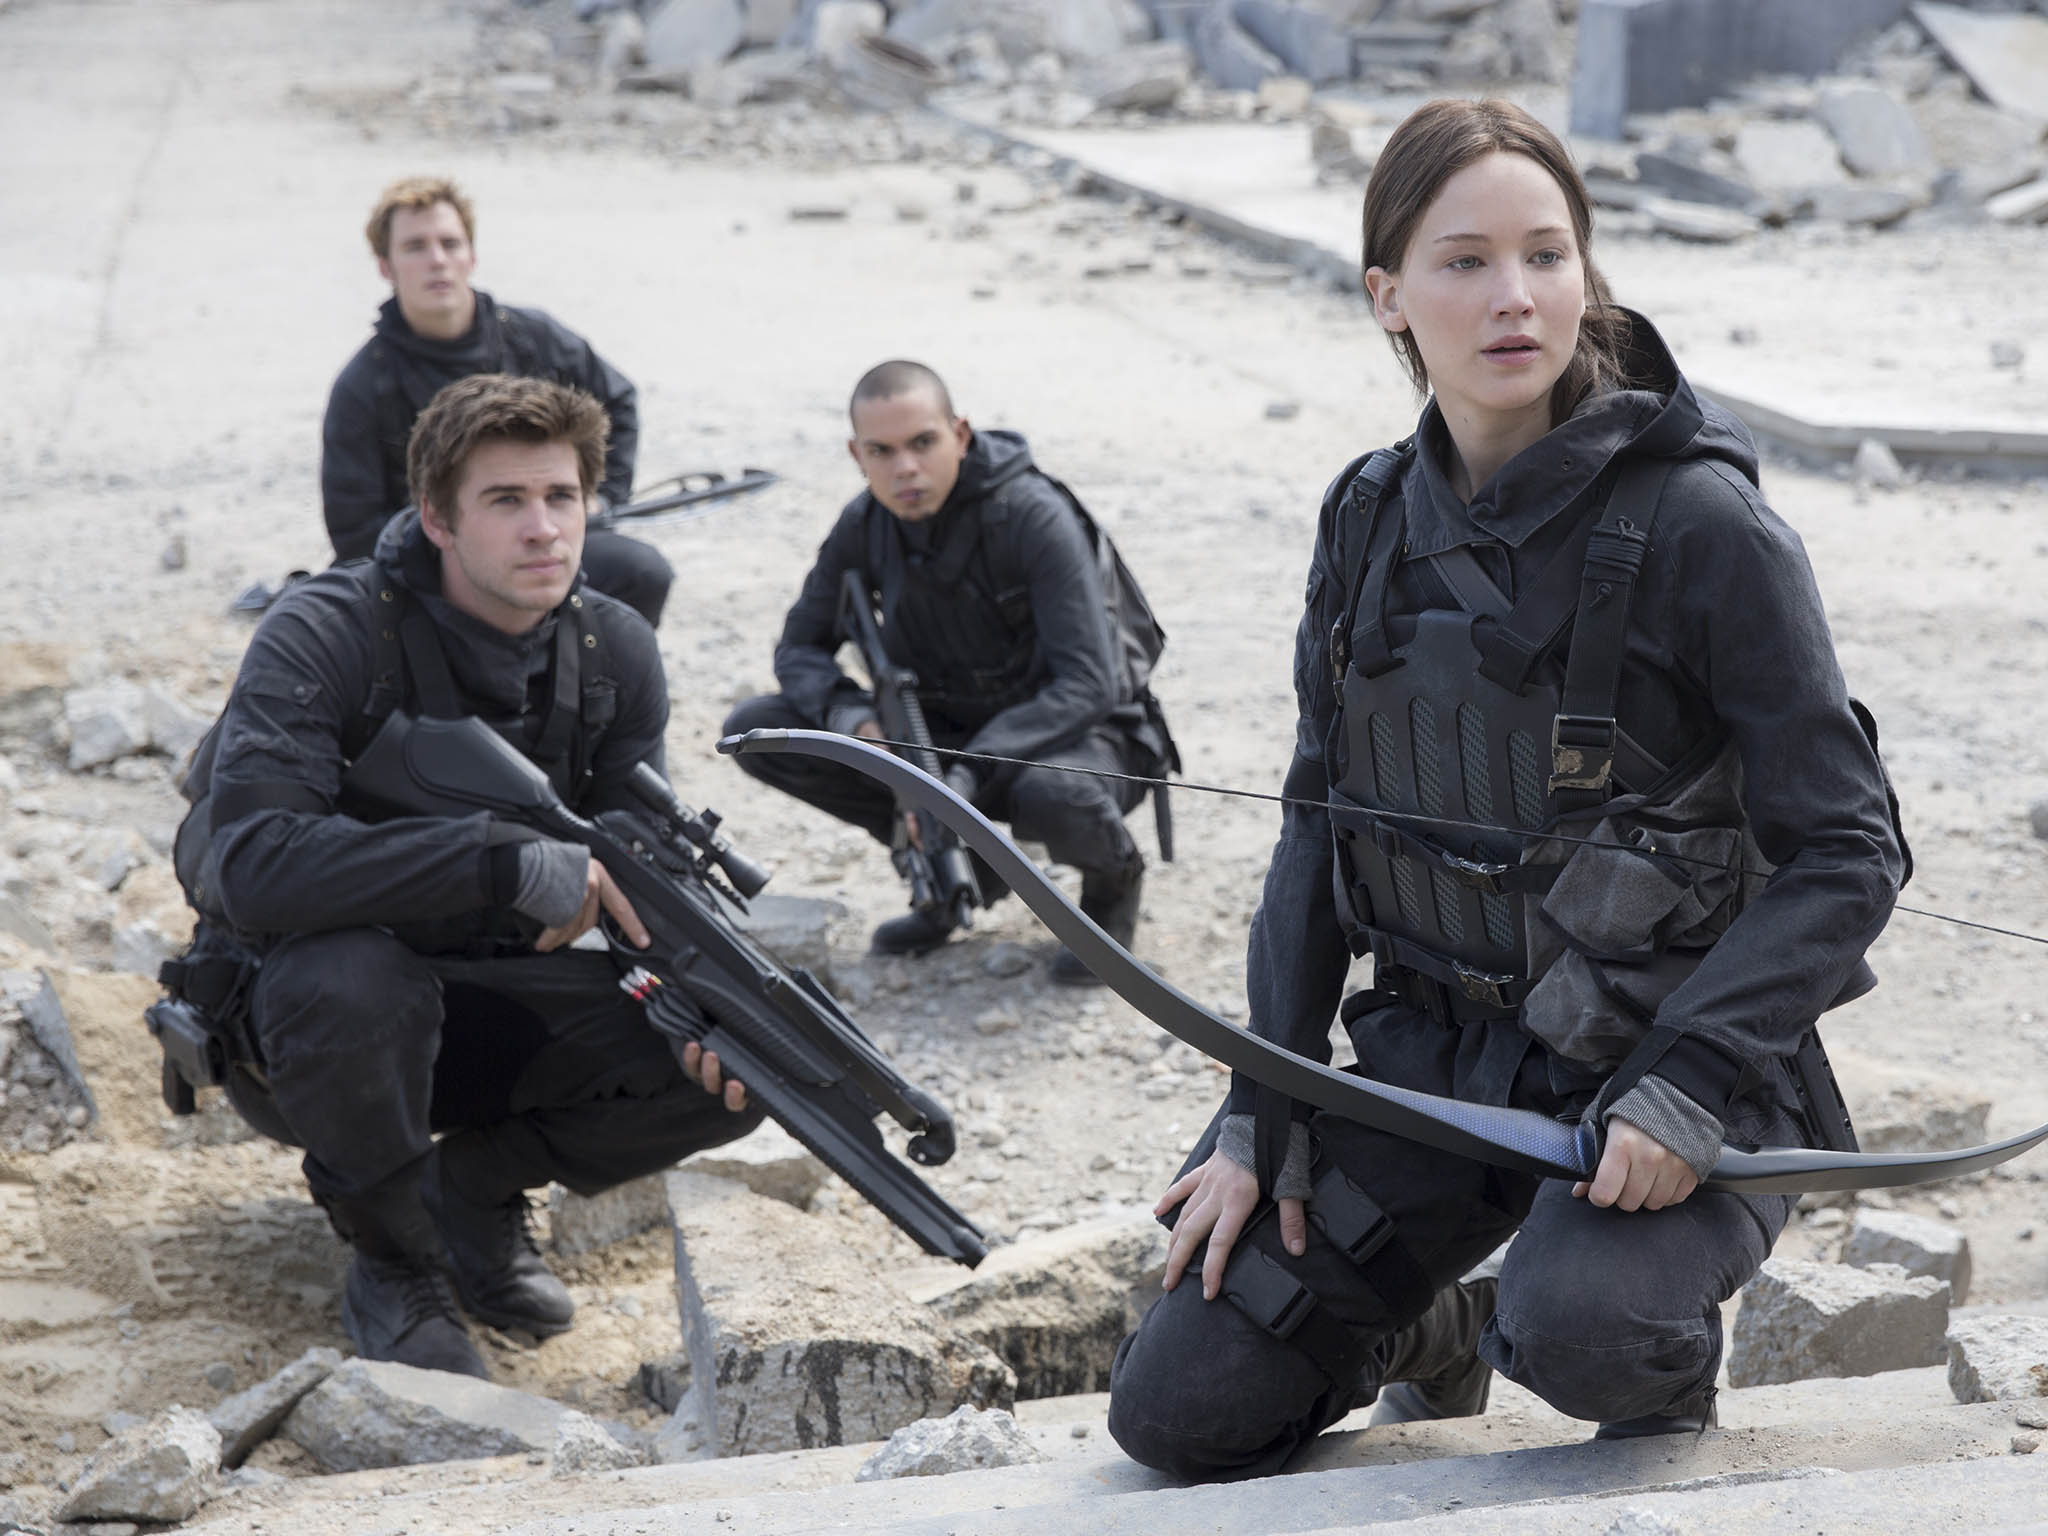 Liam Hemsworth with Jennifer Lawrence in The Hunger Games: Mockingjay – Part 2